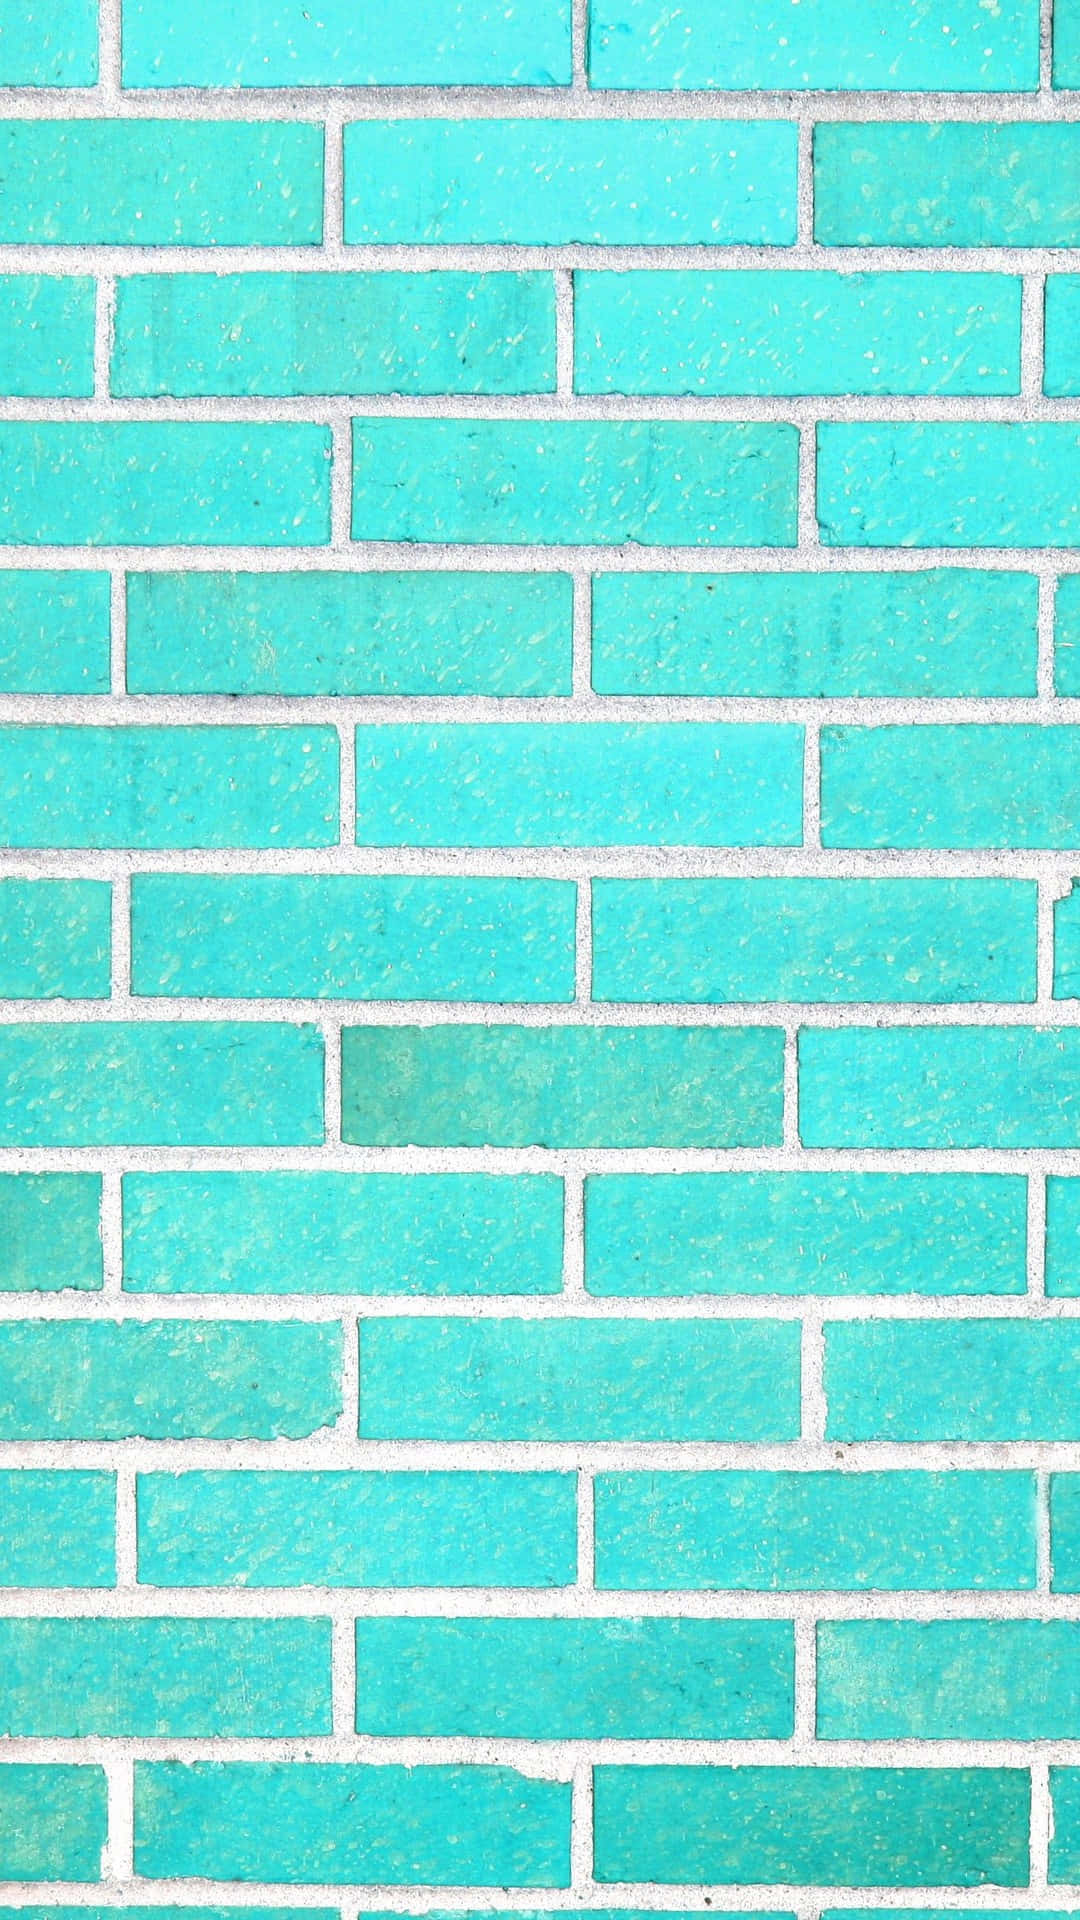 Cute Iphone Teal Brick Wall Picture